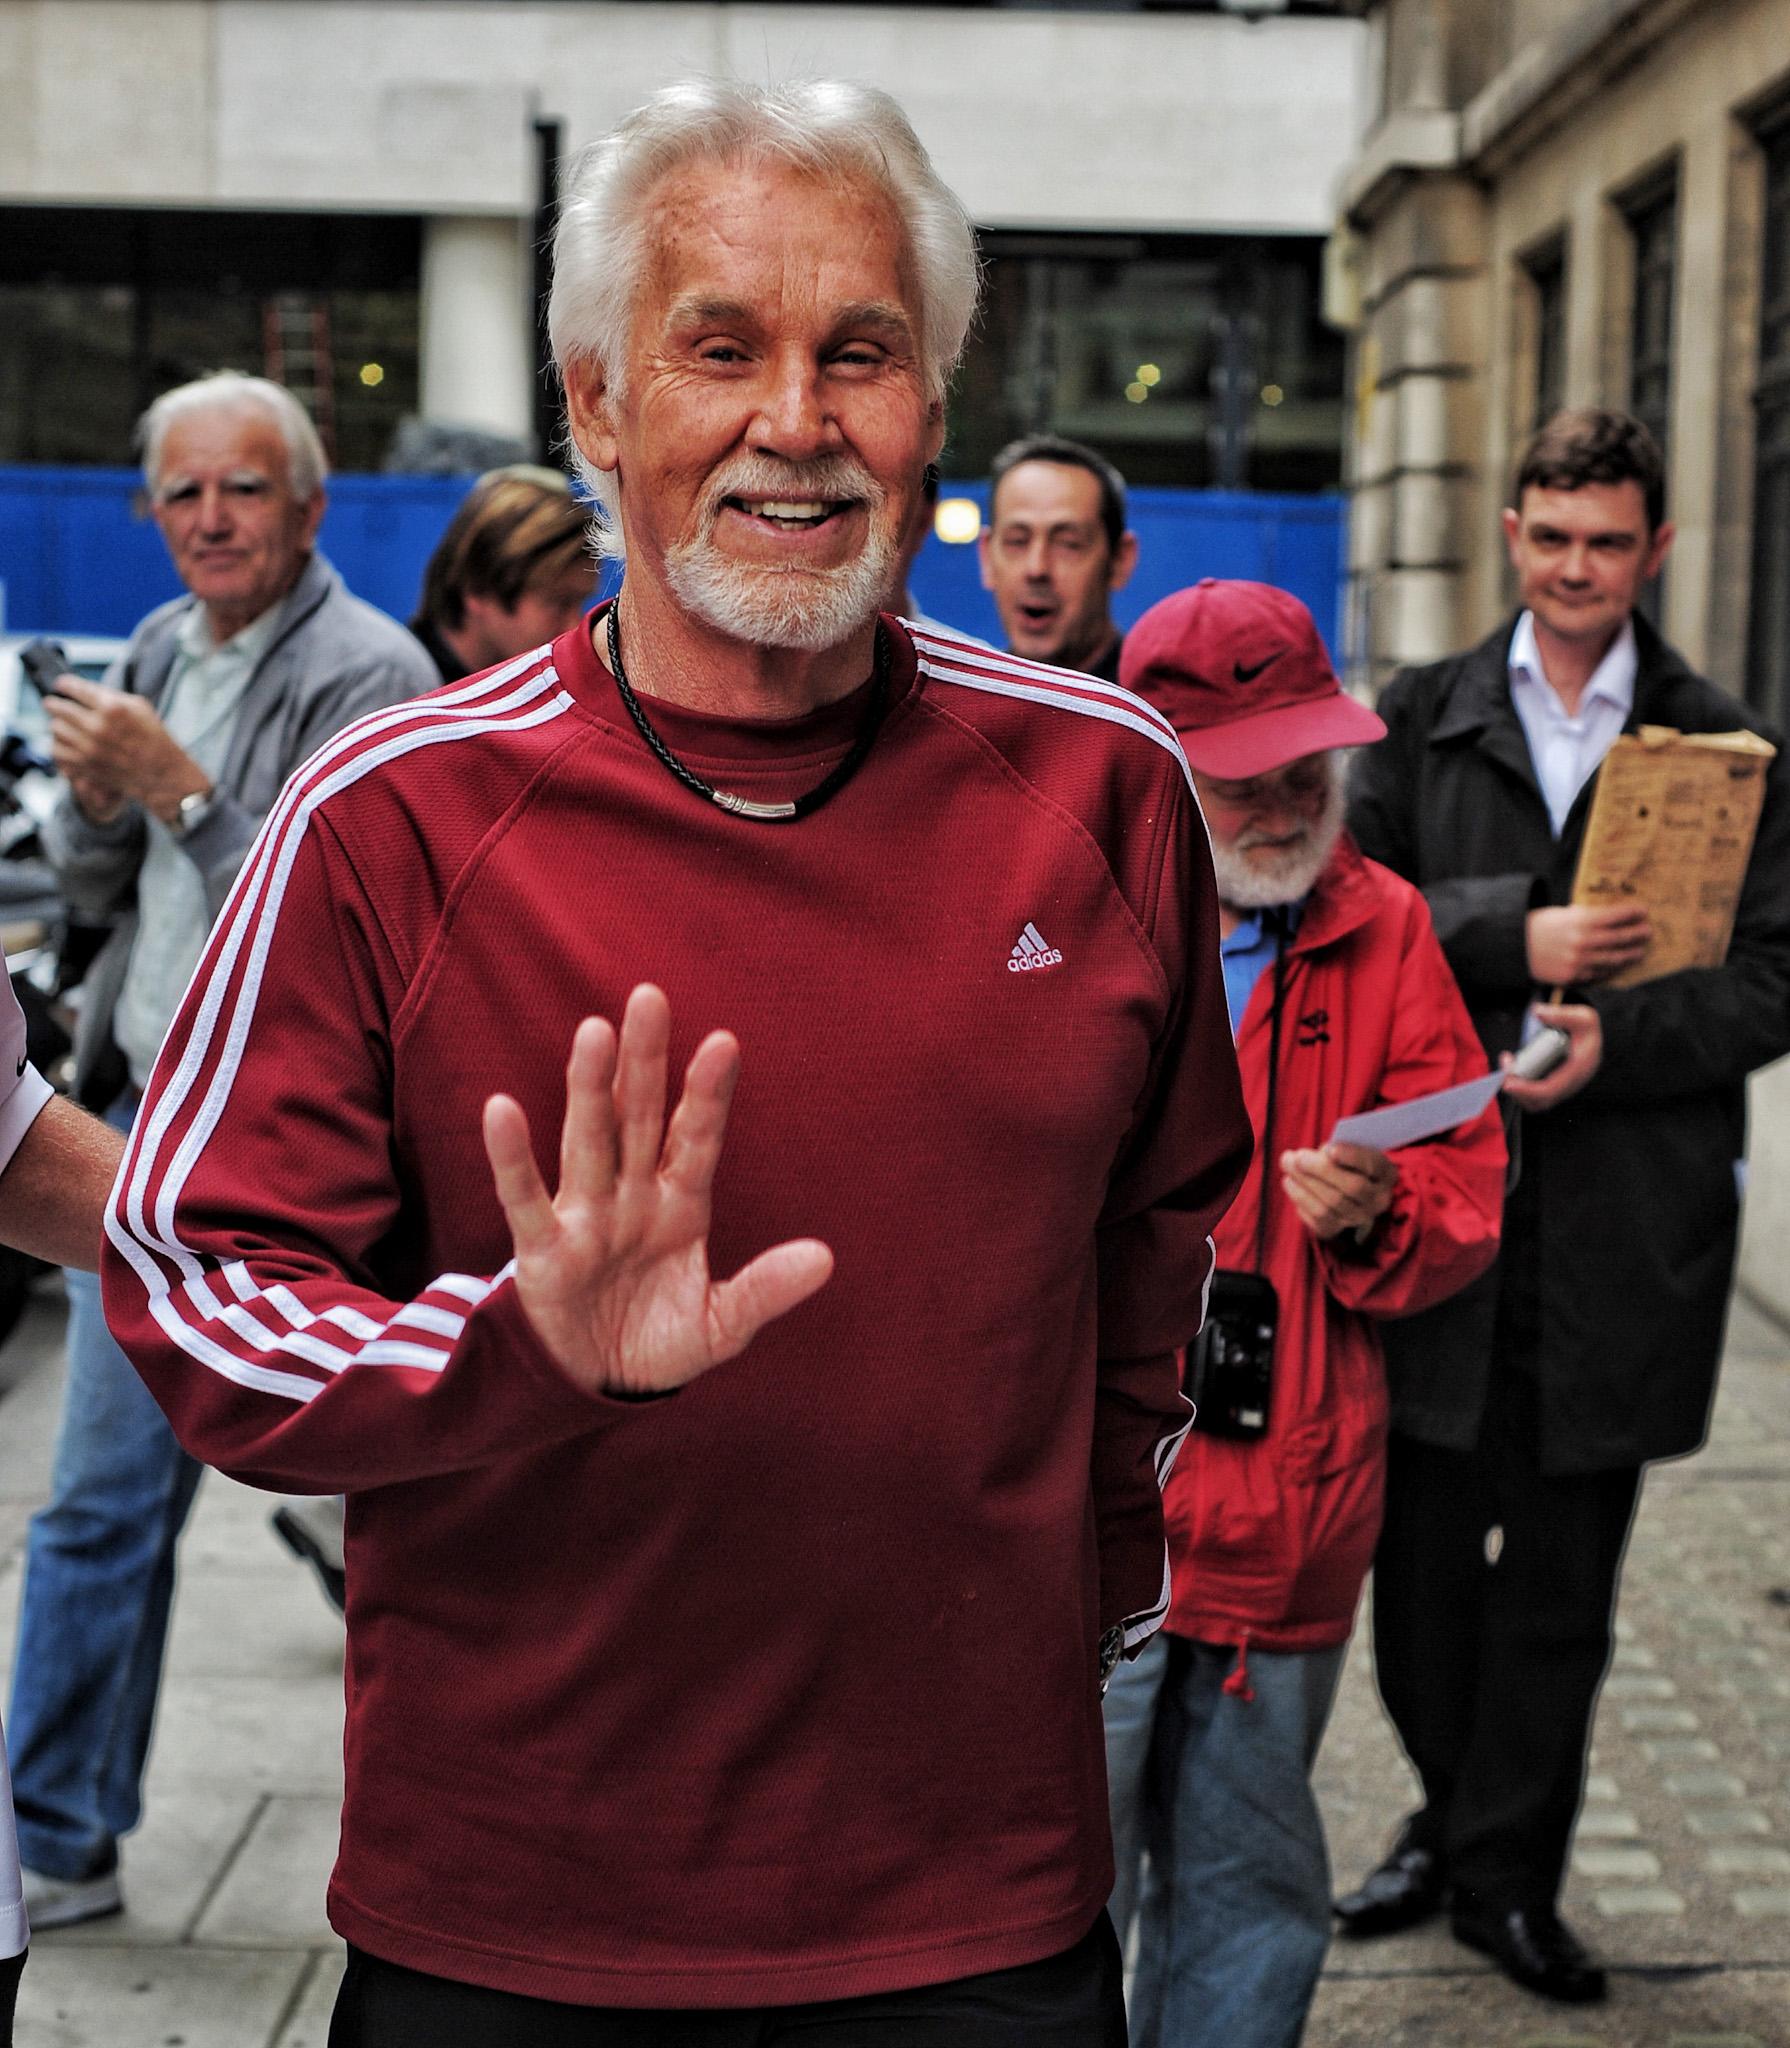 Kenny Rogers photographed in London, England on June 9th 2010